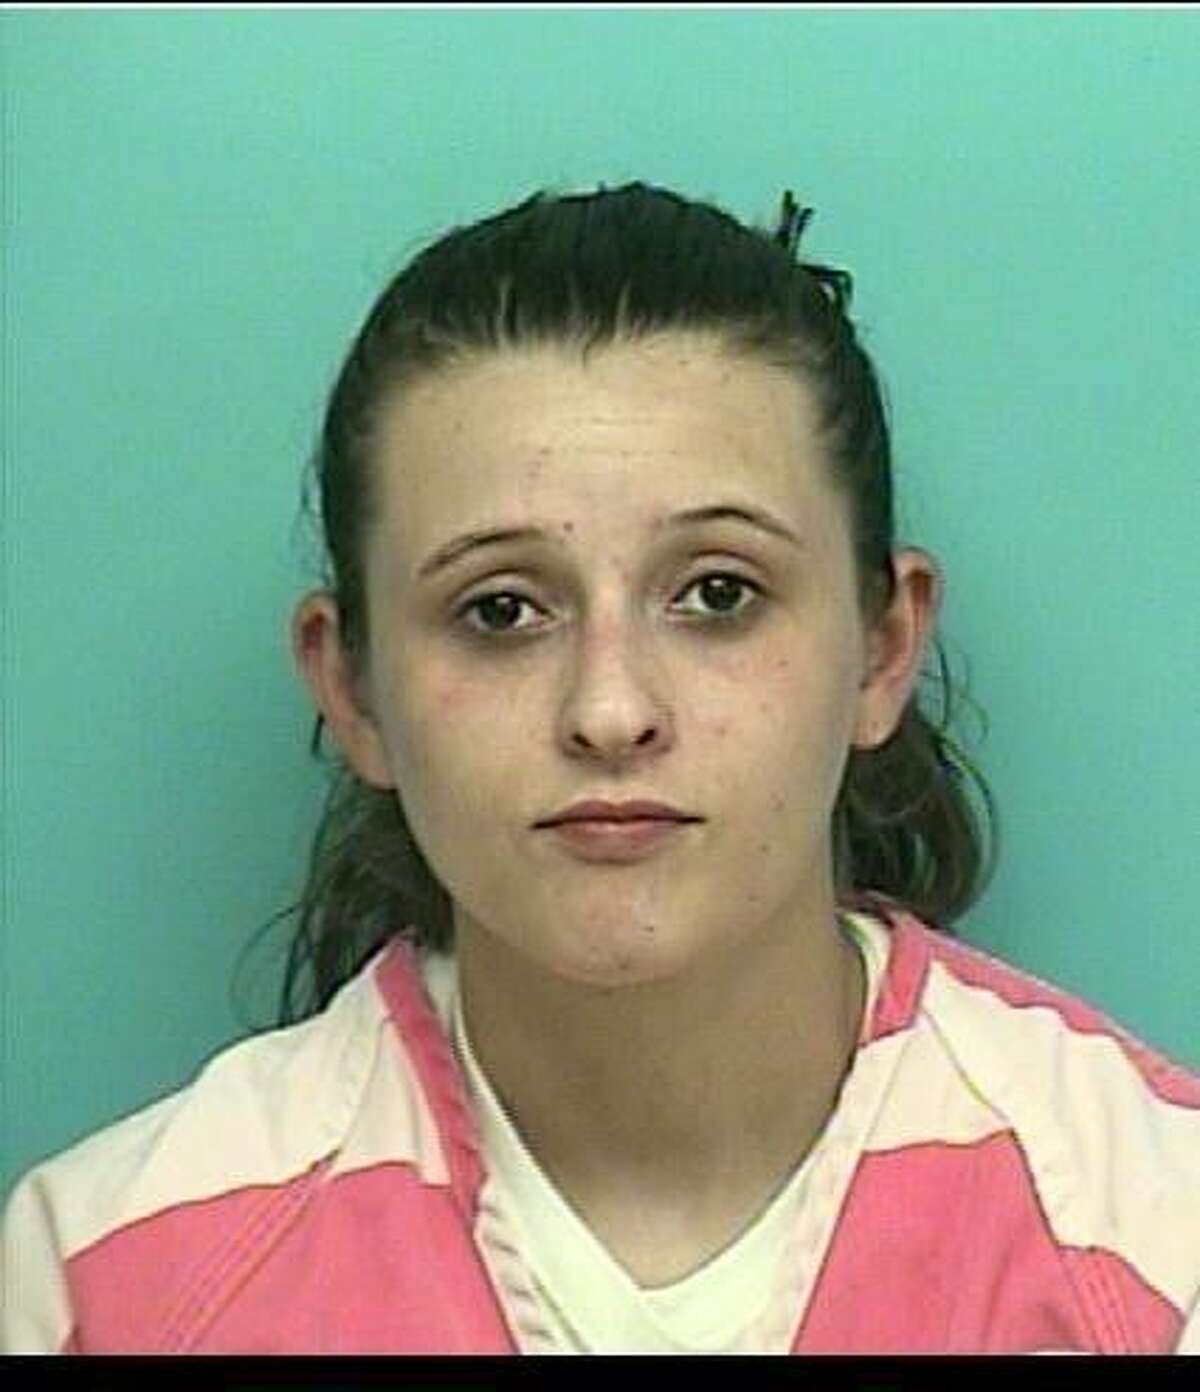 SONS, Danielle ReneeWhite/Female DOB: 06-16-1993 Height: 5’06” Weight: 115 lbs. Hair: Brown Eyes: Brown Warrant: #130100391 Order of Arrest Possession W/Intent to Del C/S LKA: Bilnoski Rd, Willis.